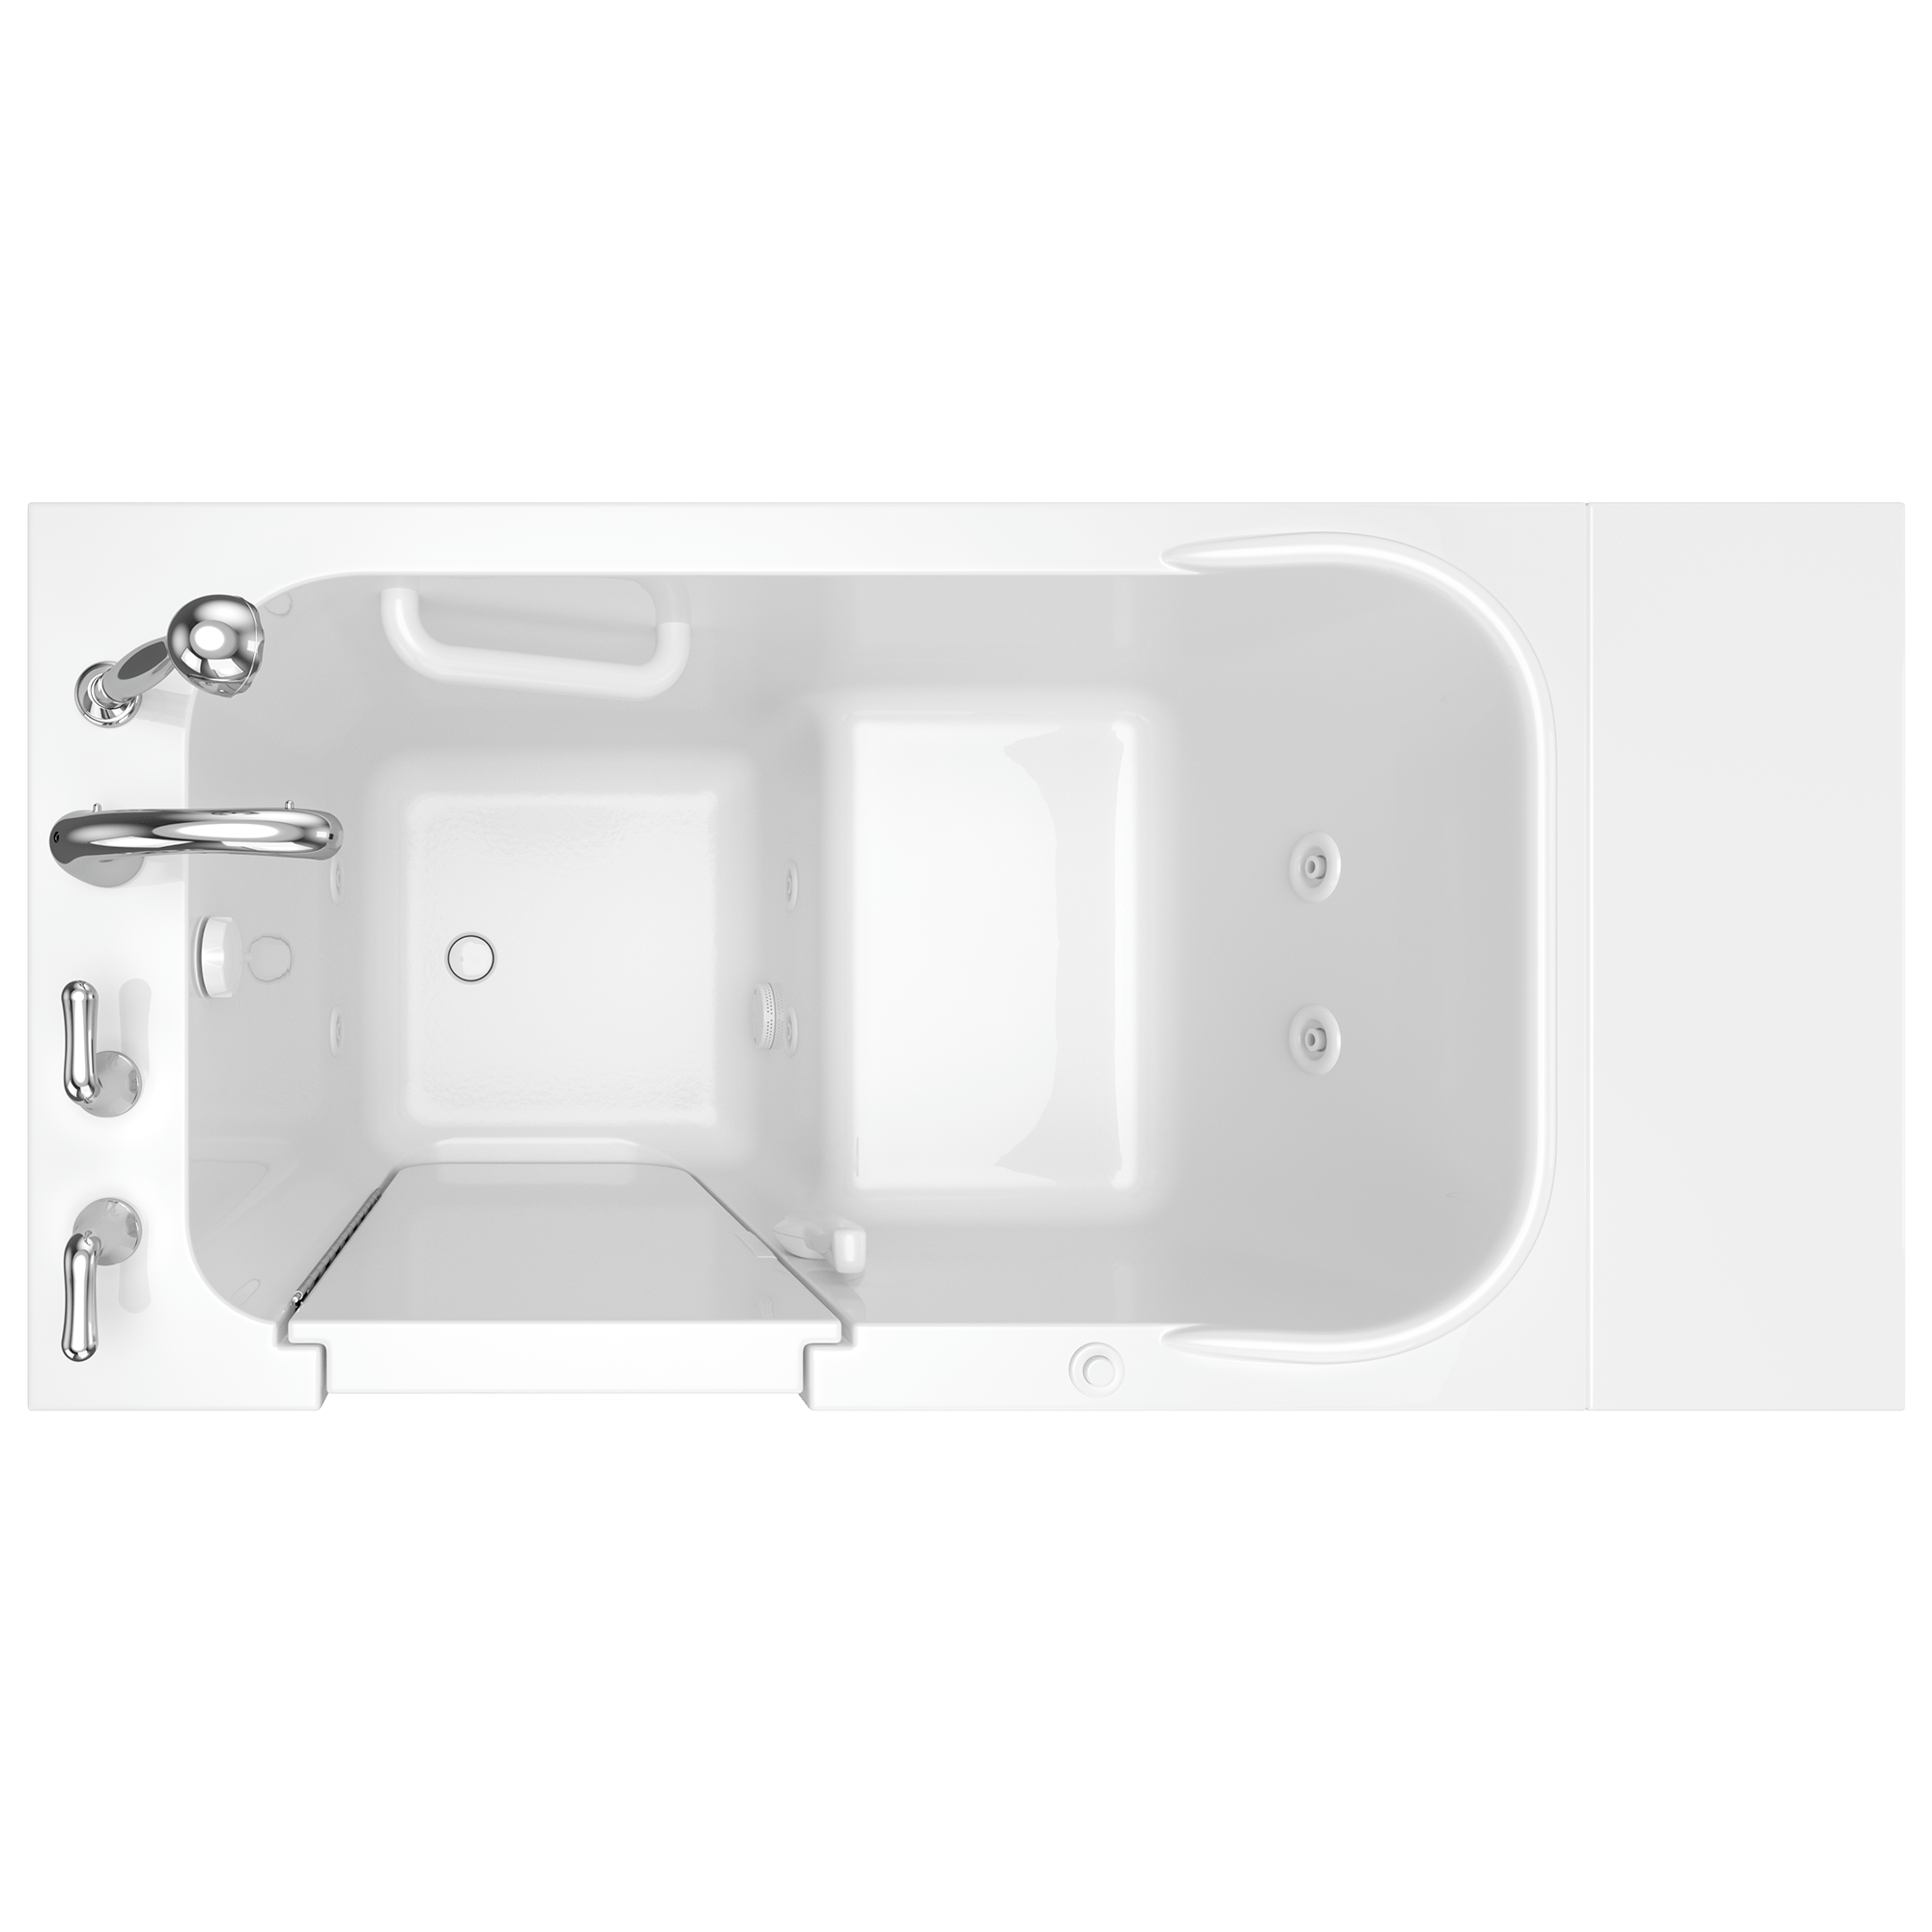 Gelcoat Entry Series 48 x 28-Inch Walk-In Tub With Whirlpool System – Left-Hand Drain With Faucet